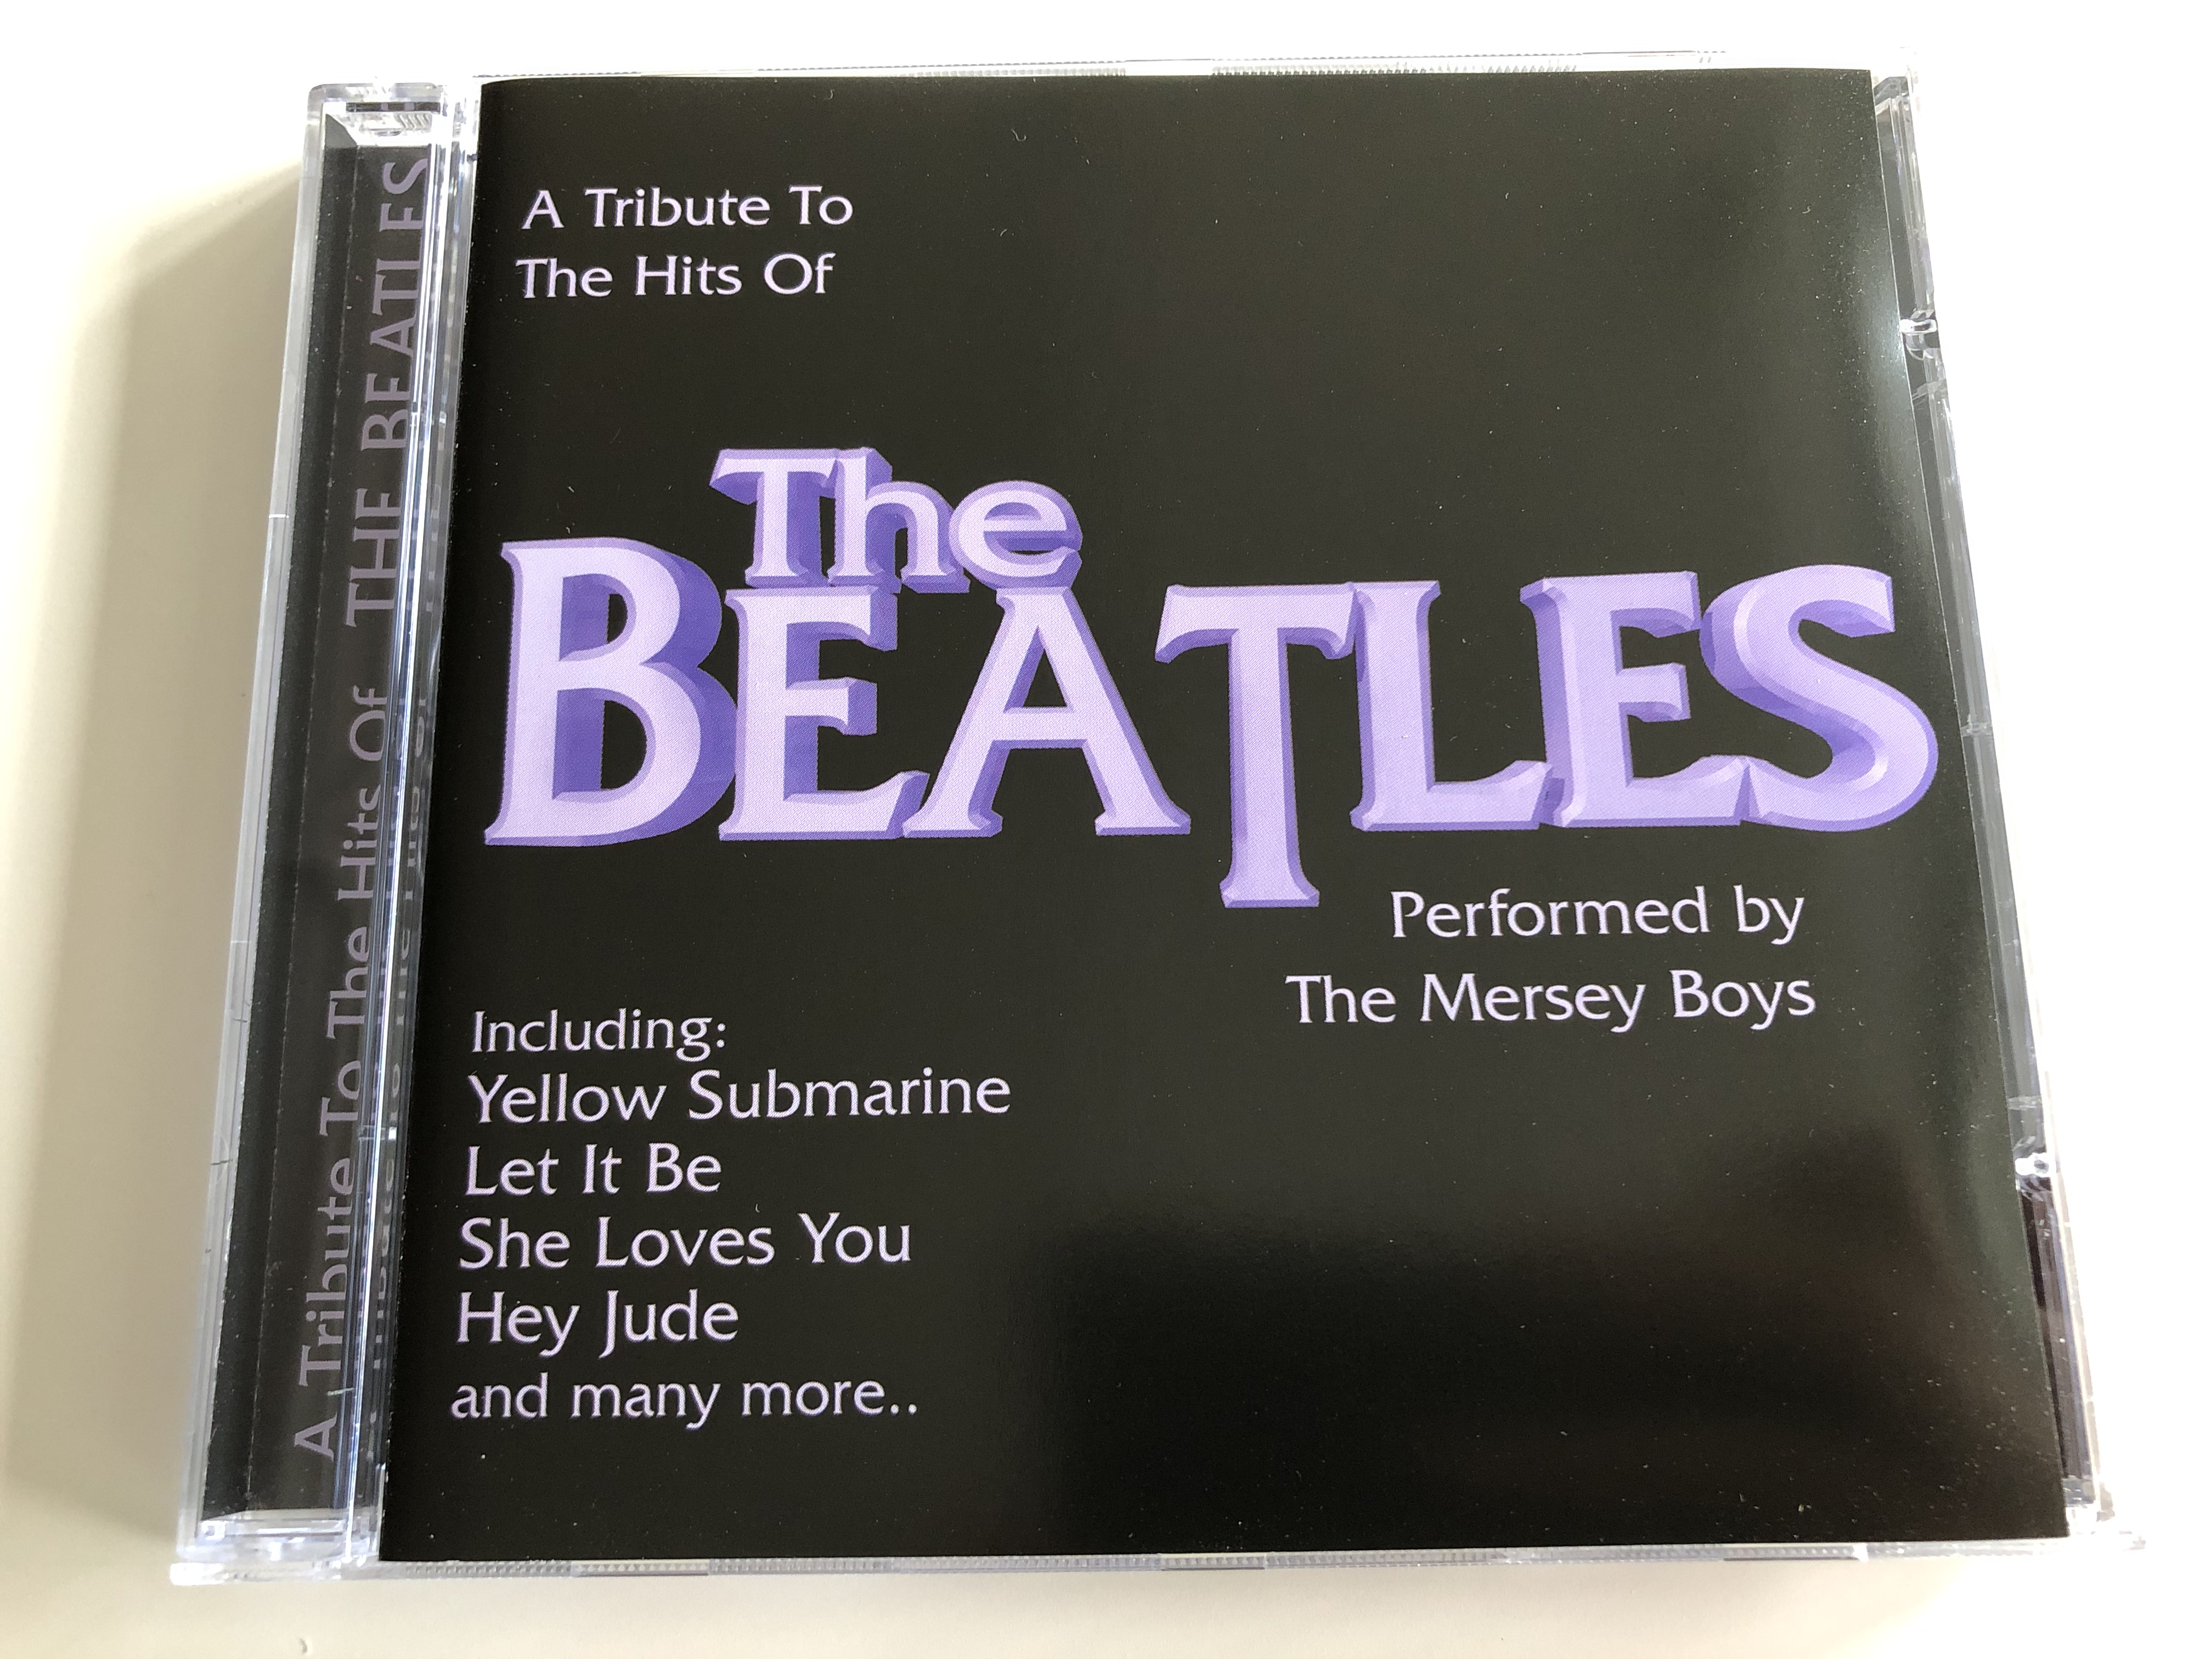 a-tribute-to-the-hits-of-beatles-performed-by-the-mersey-boys-including-yellow-submarine-let-it-be-she-loves-you-hey-jude-and-many-more...-sp-series-audio-cd-2004-sp113-2-1-.jpg